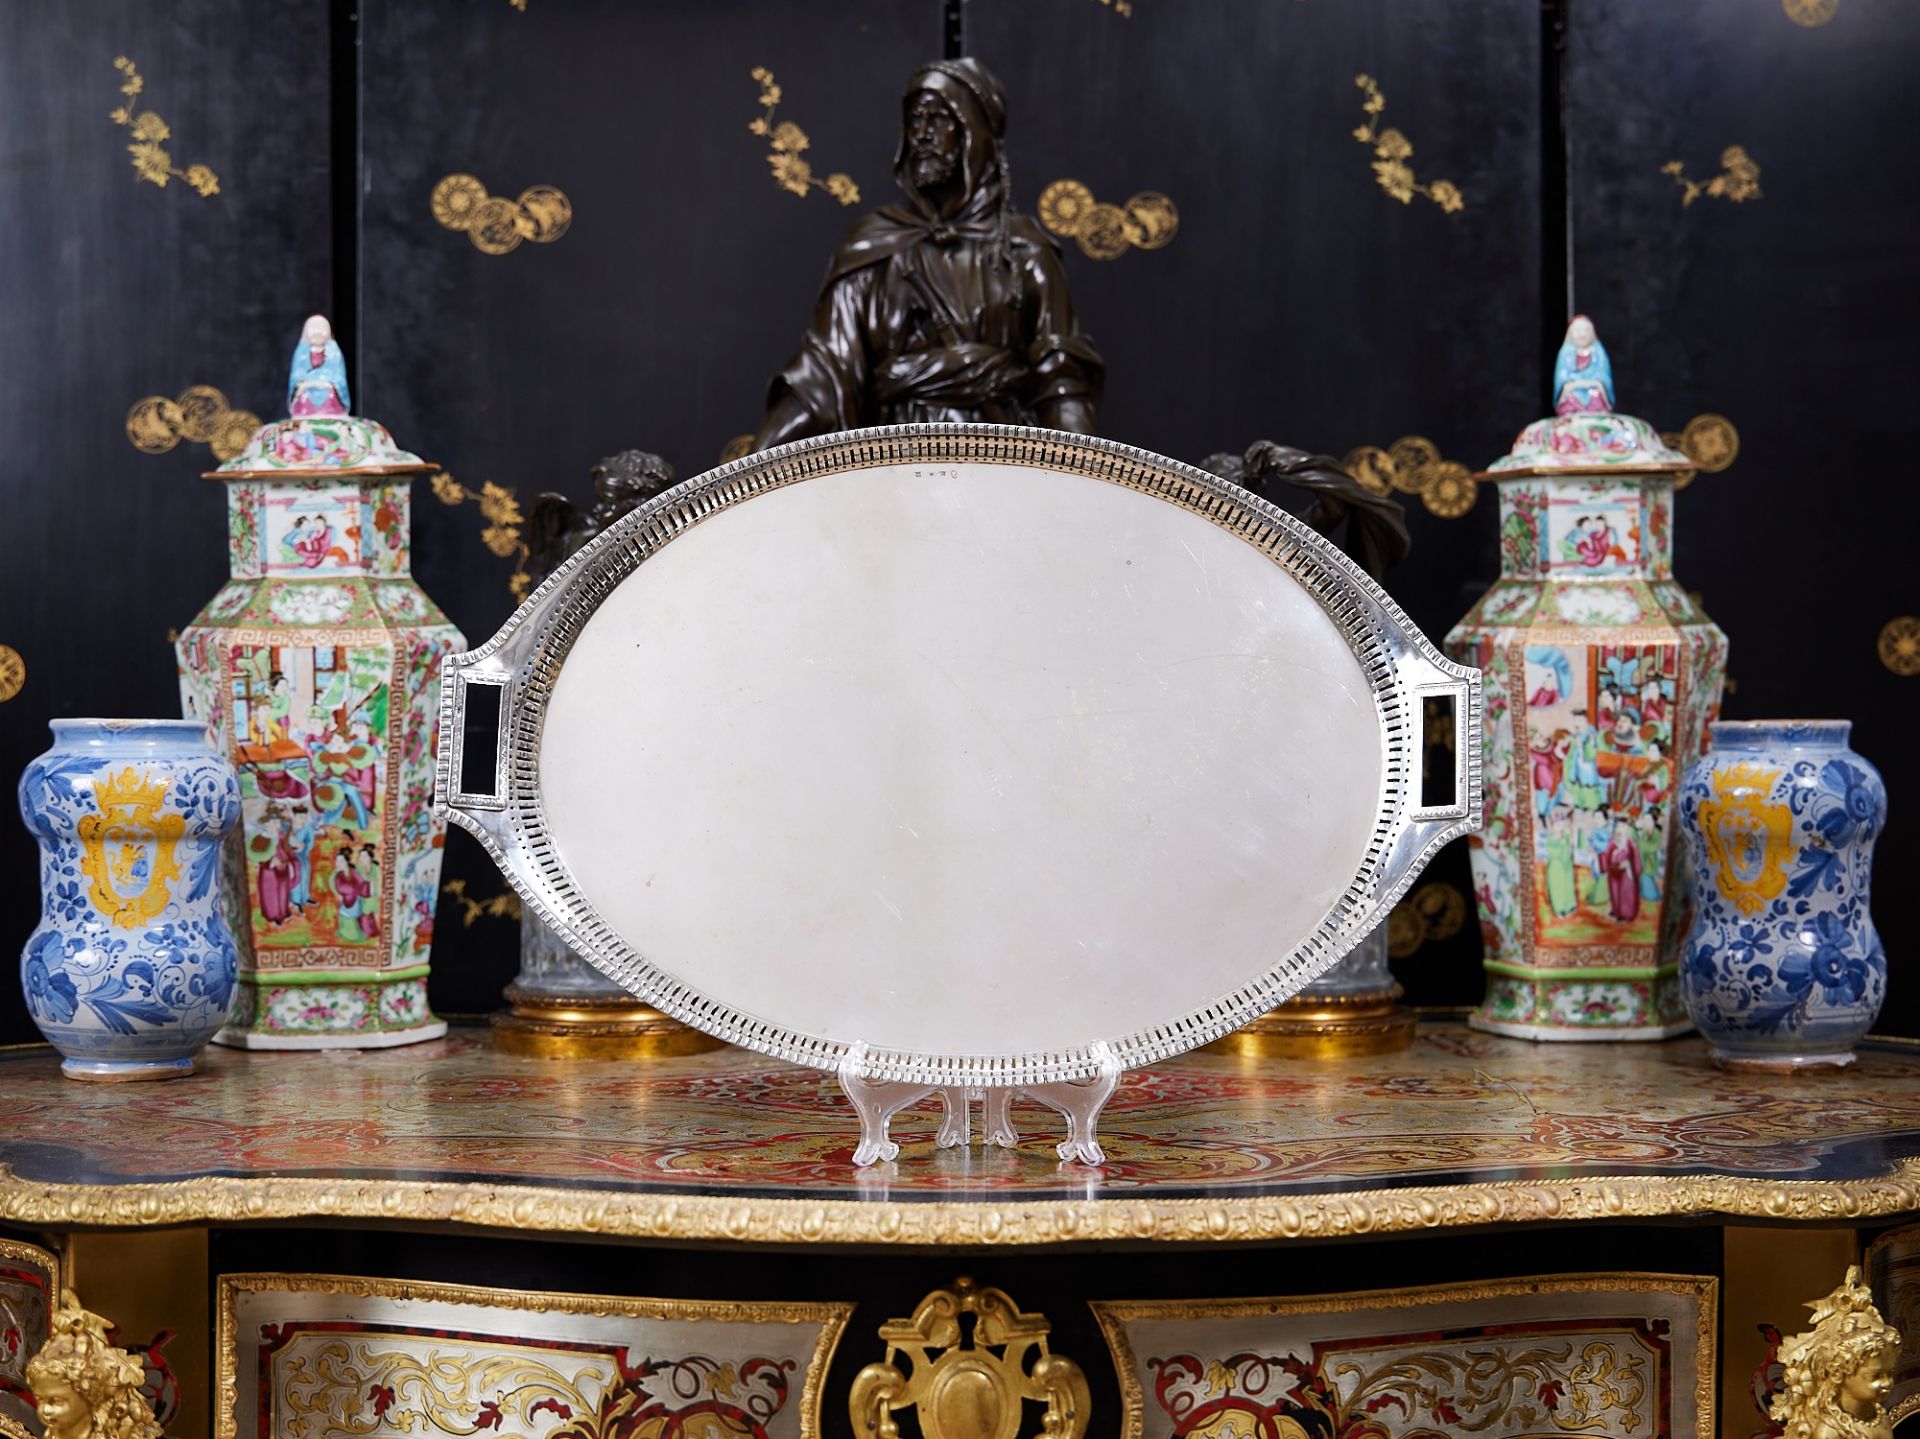 AN EARLY 19TH CENTURY NEO-CLASSICAL RUSSIAN SILVER TRAY, 1823